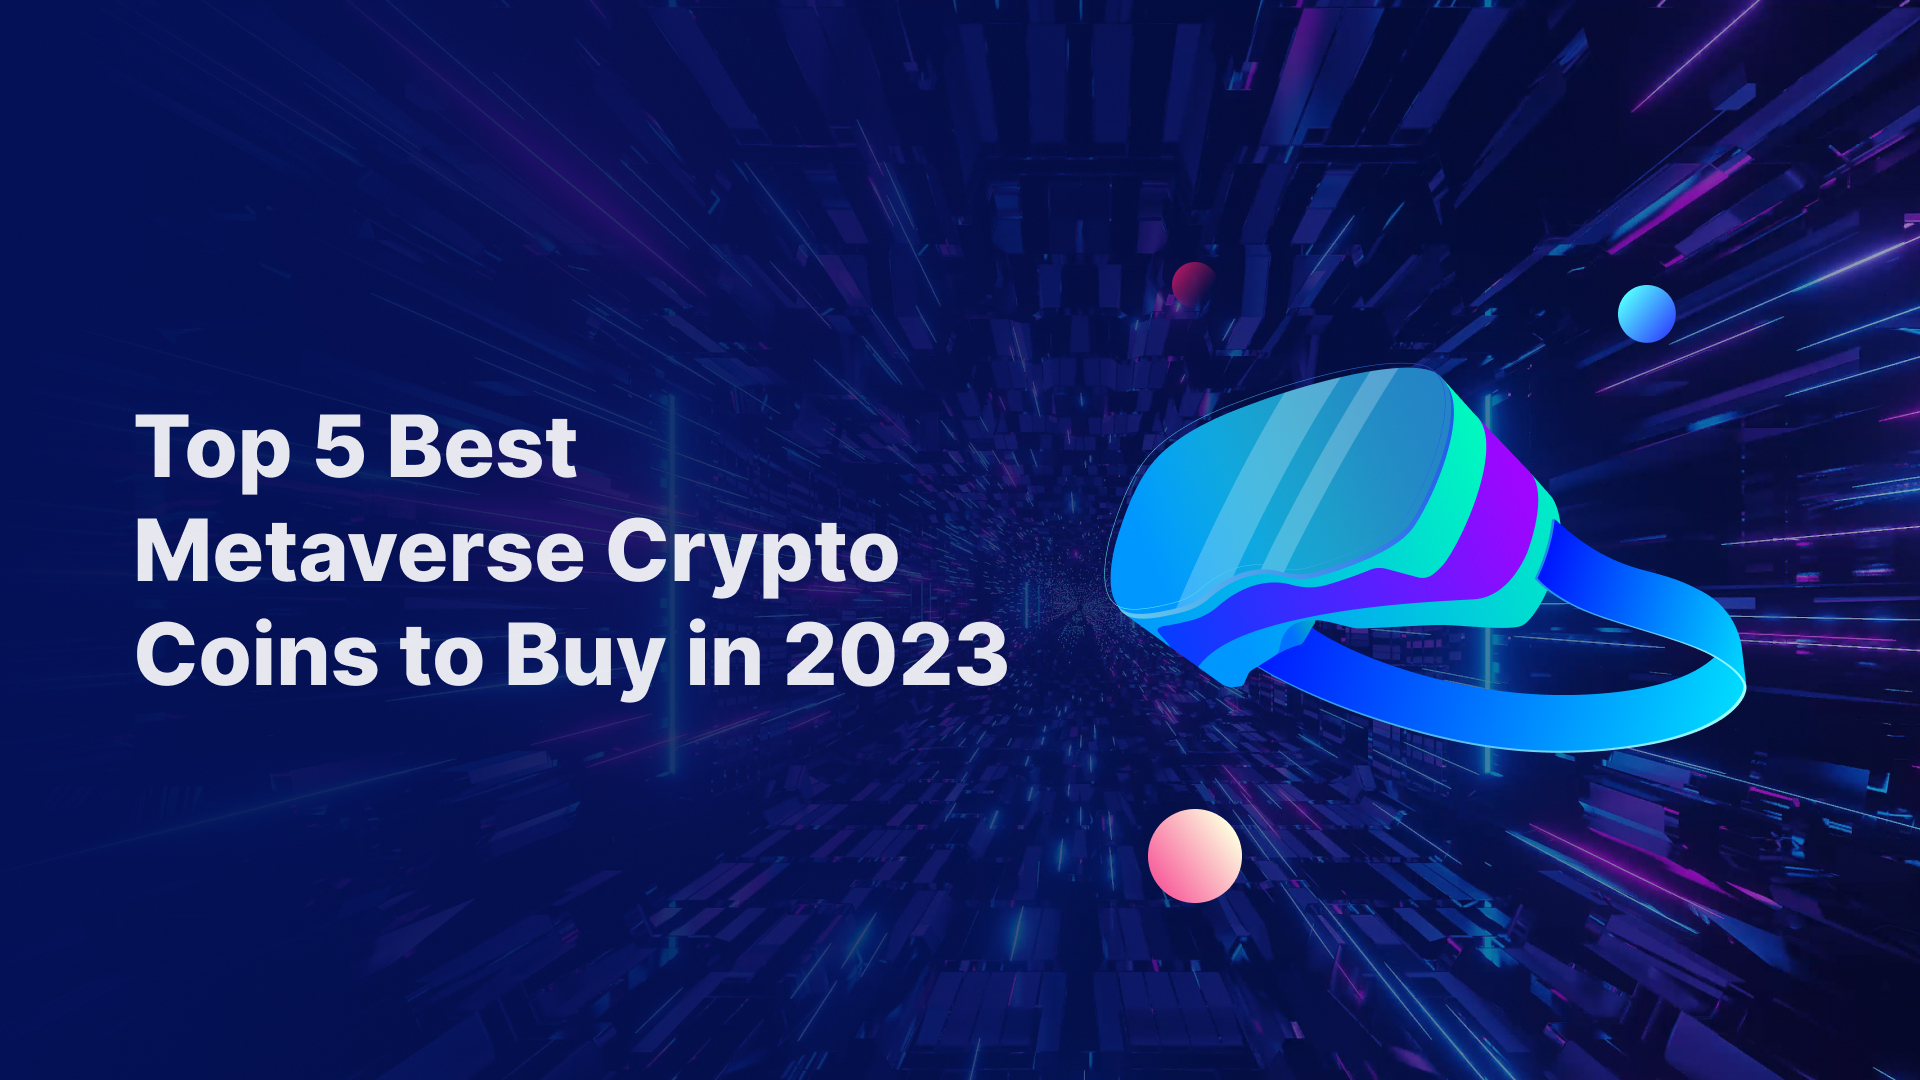 Top 5 Best Metaverse Crypto Coins to Buy in 2023